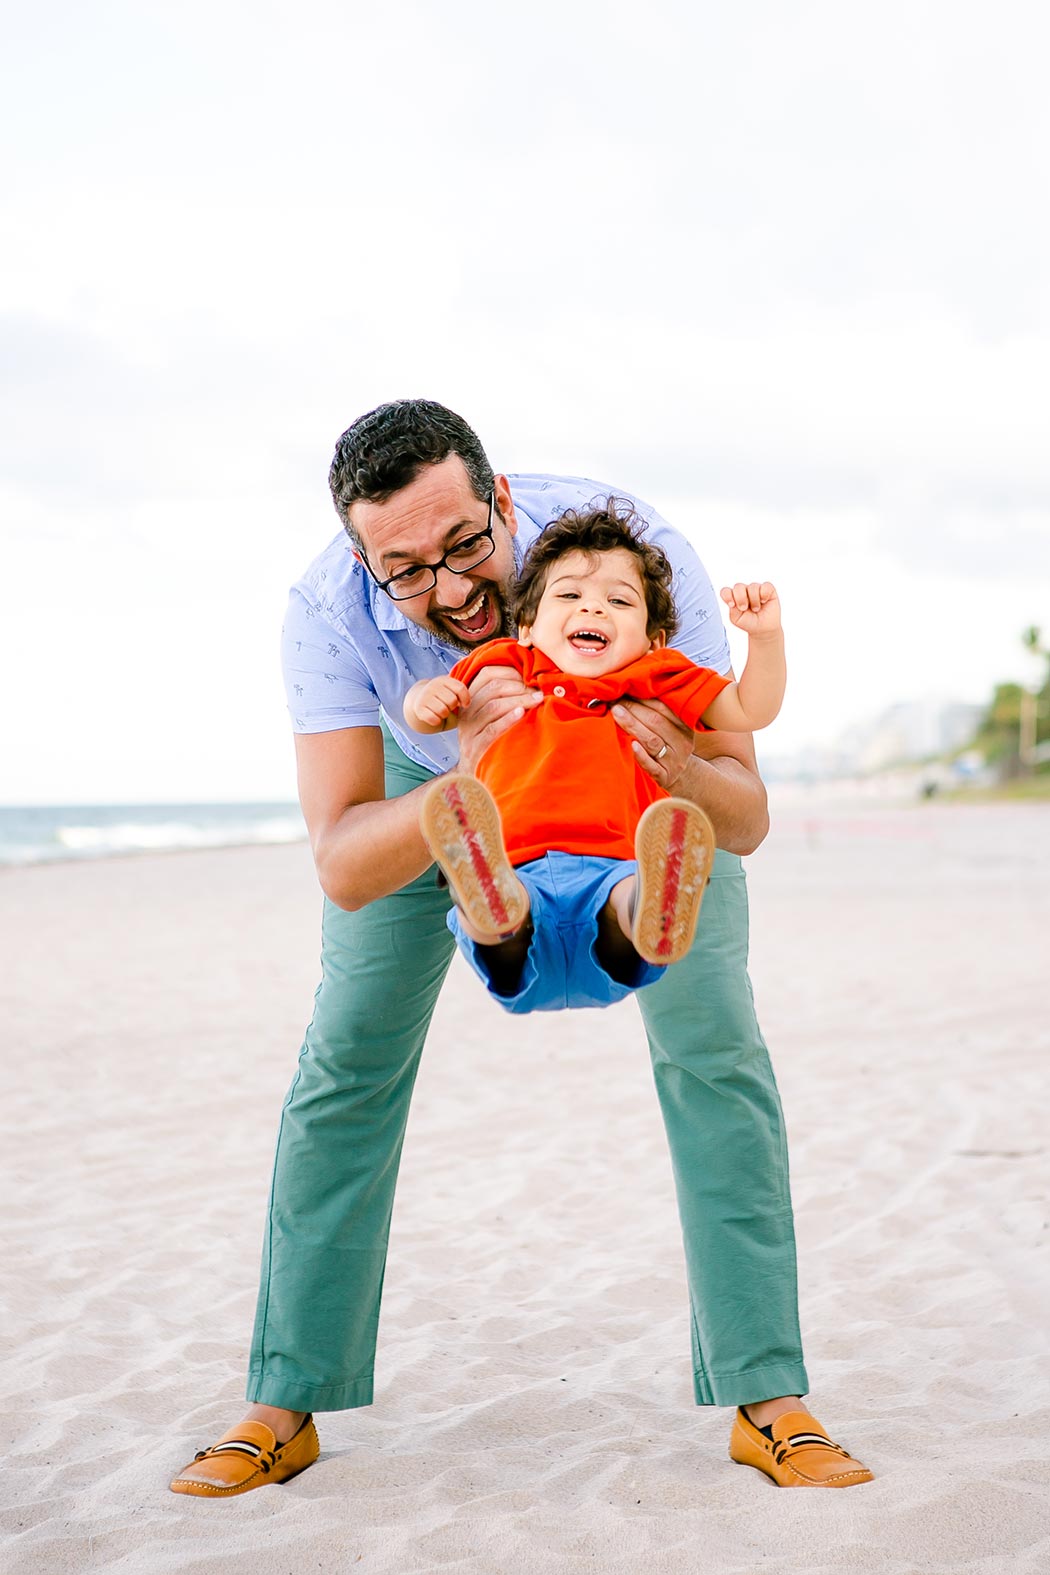 ideas for family photography poses | posing ideas for family photography | family photographer fort lauderdale | fort lauderdale photographer